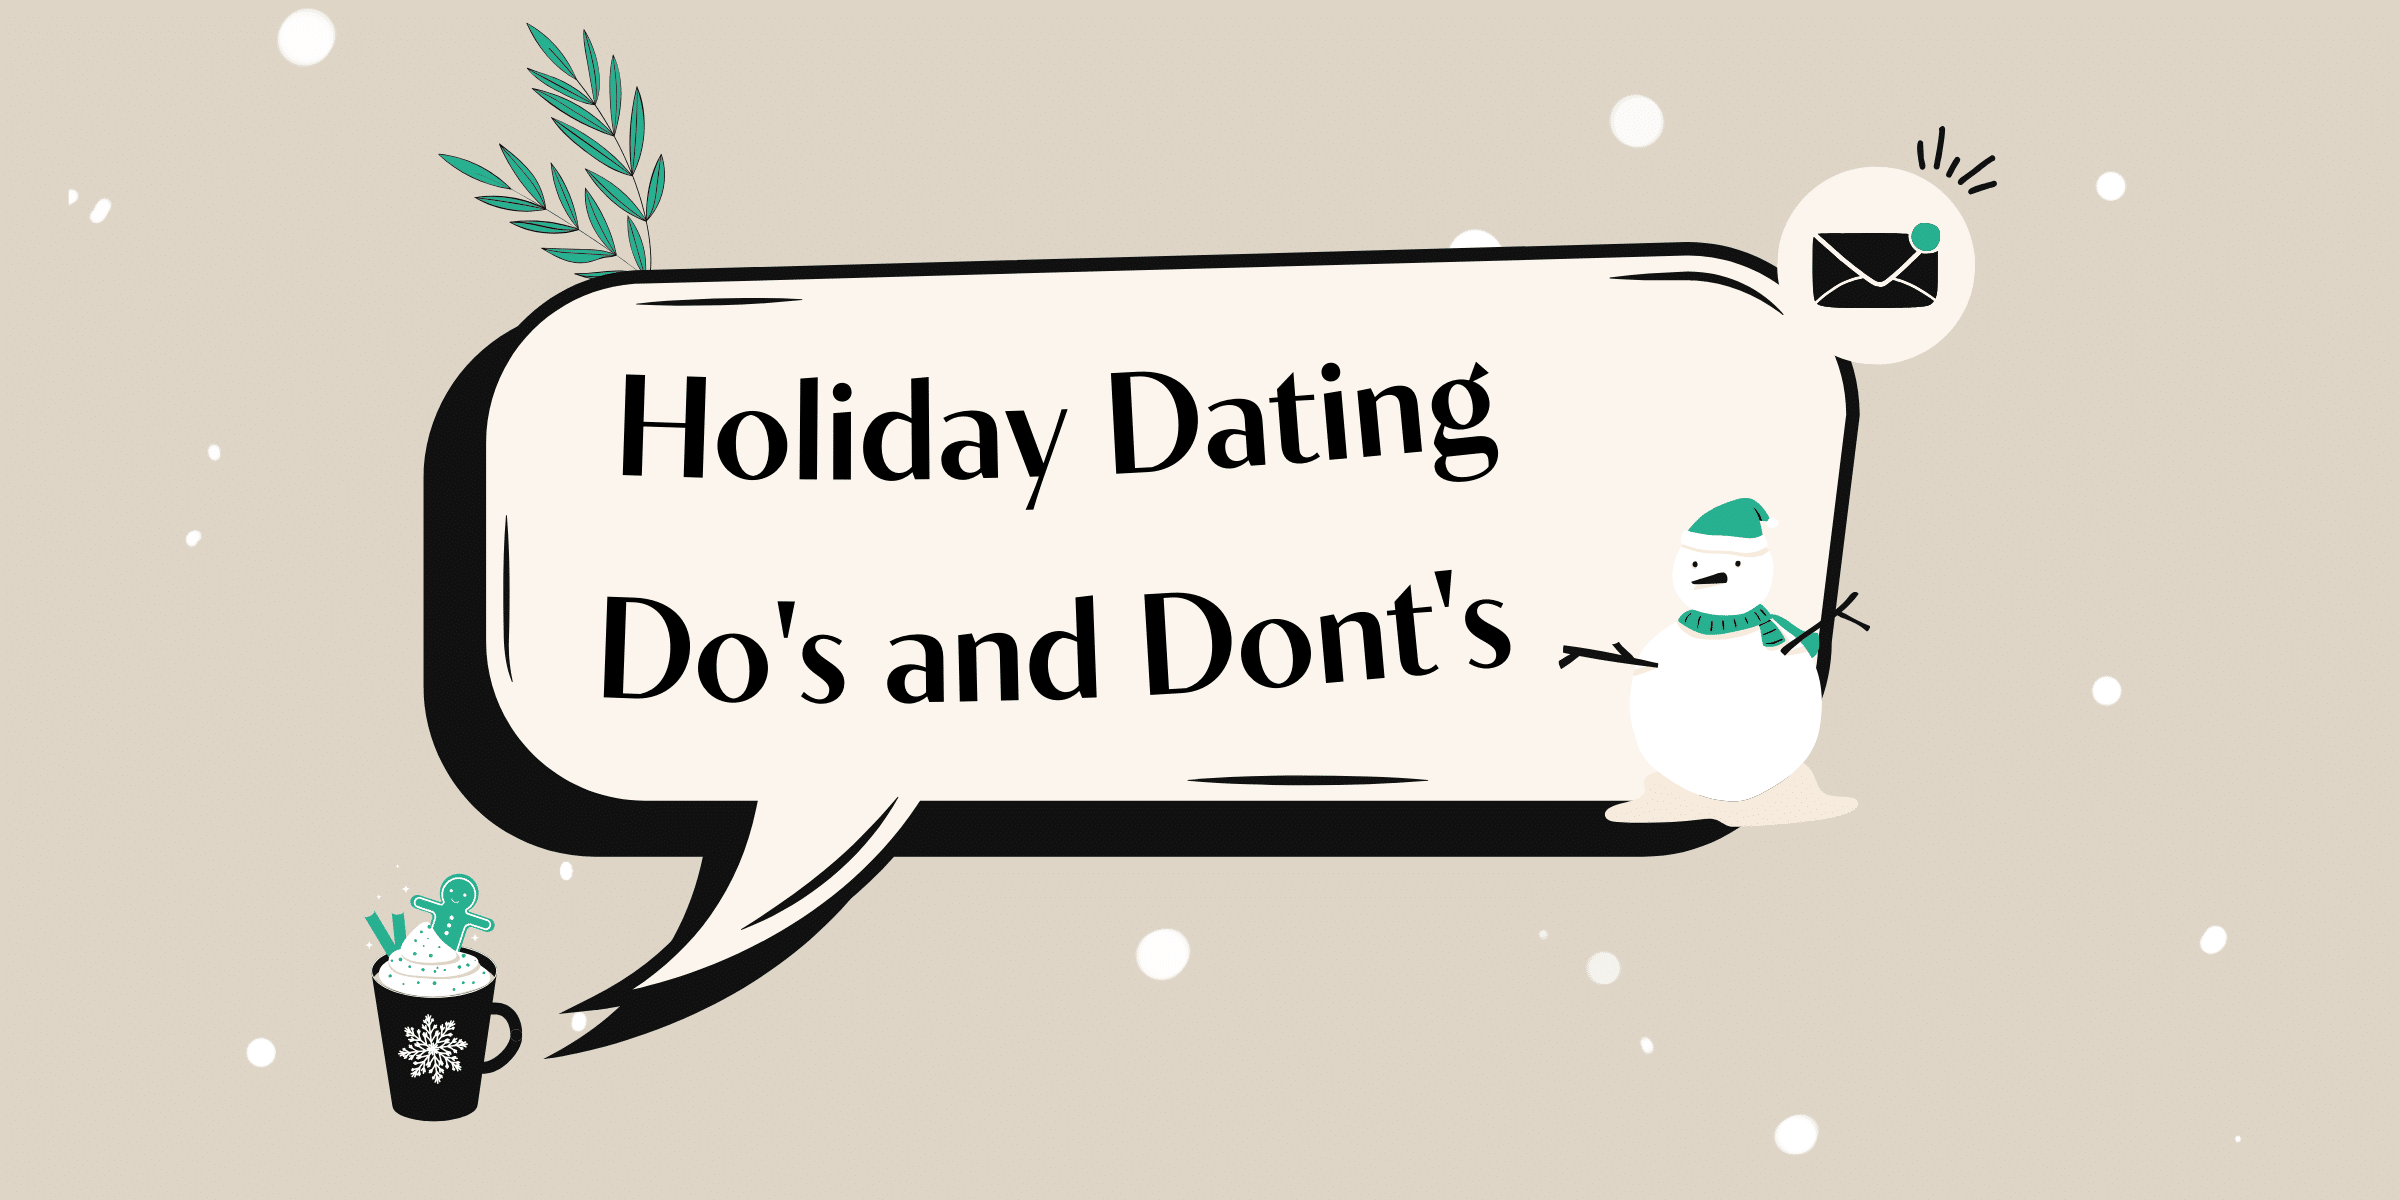 Whether you’re single and ready to mingle or already coupled up, follow our holiday dating do’s and don'ts to see you through this festive season.